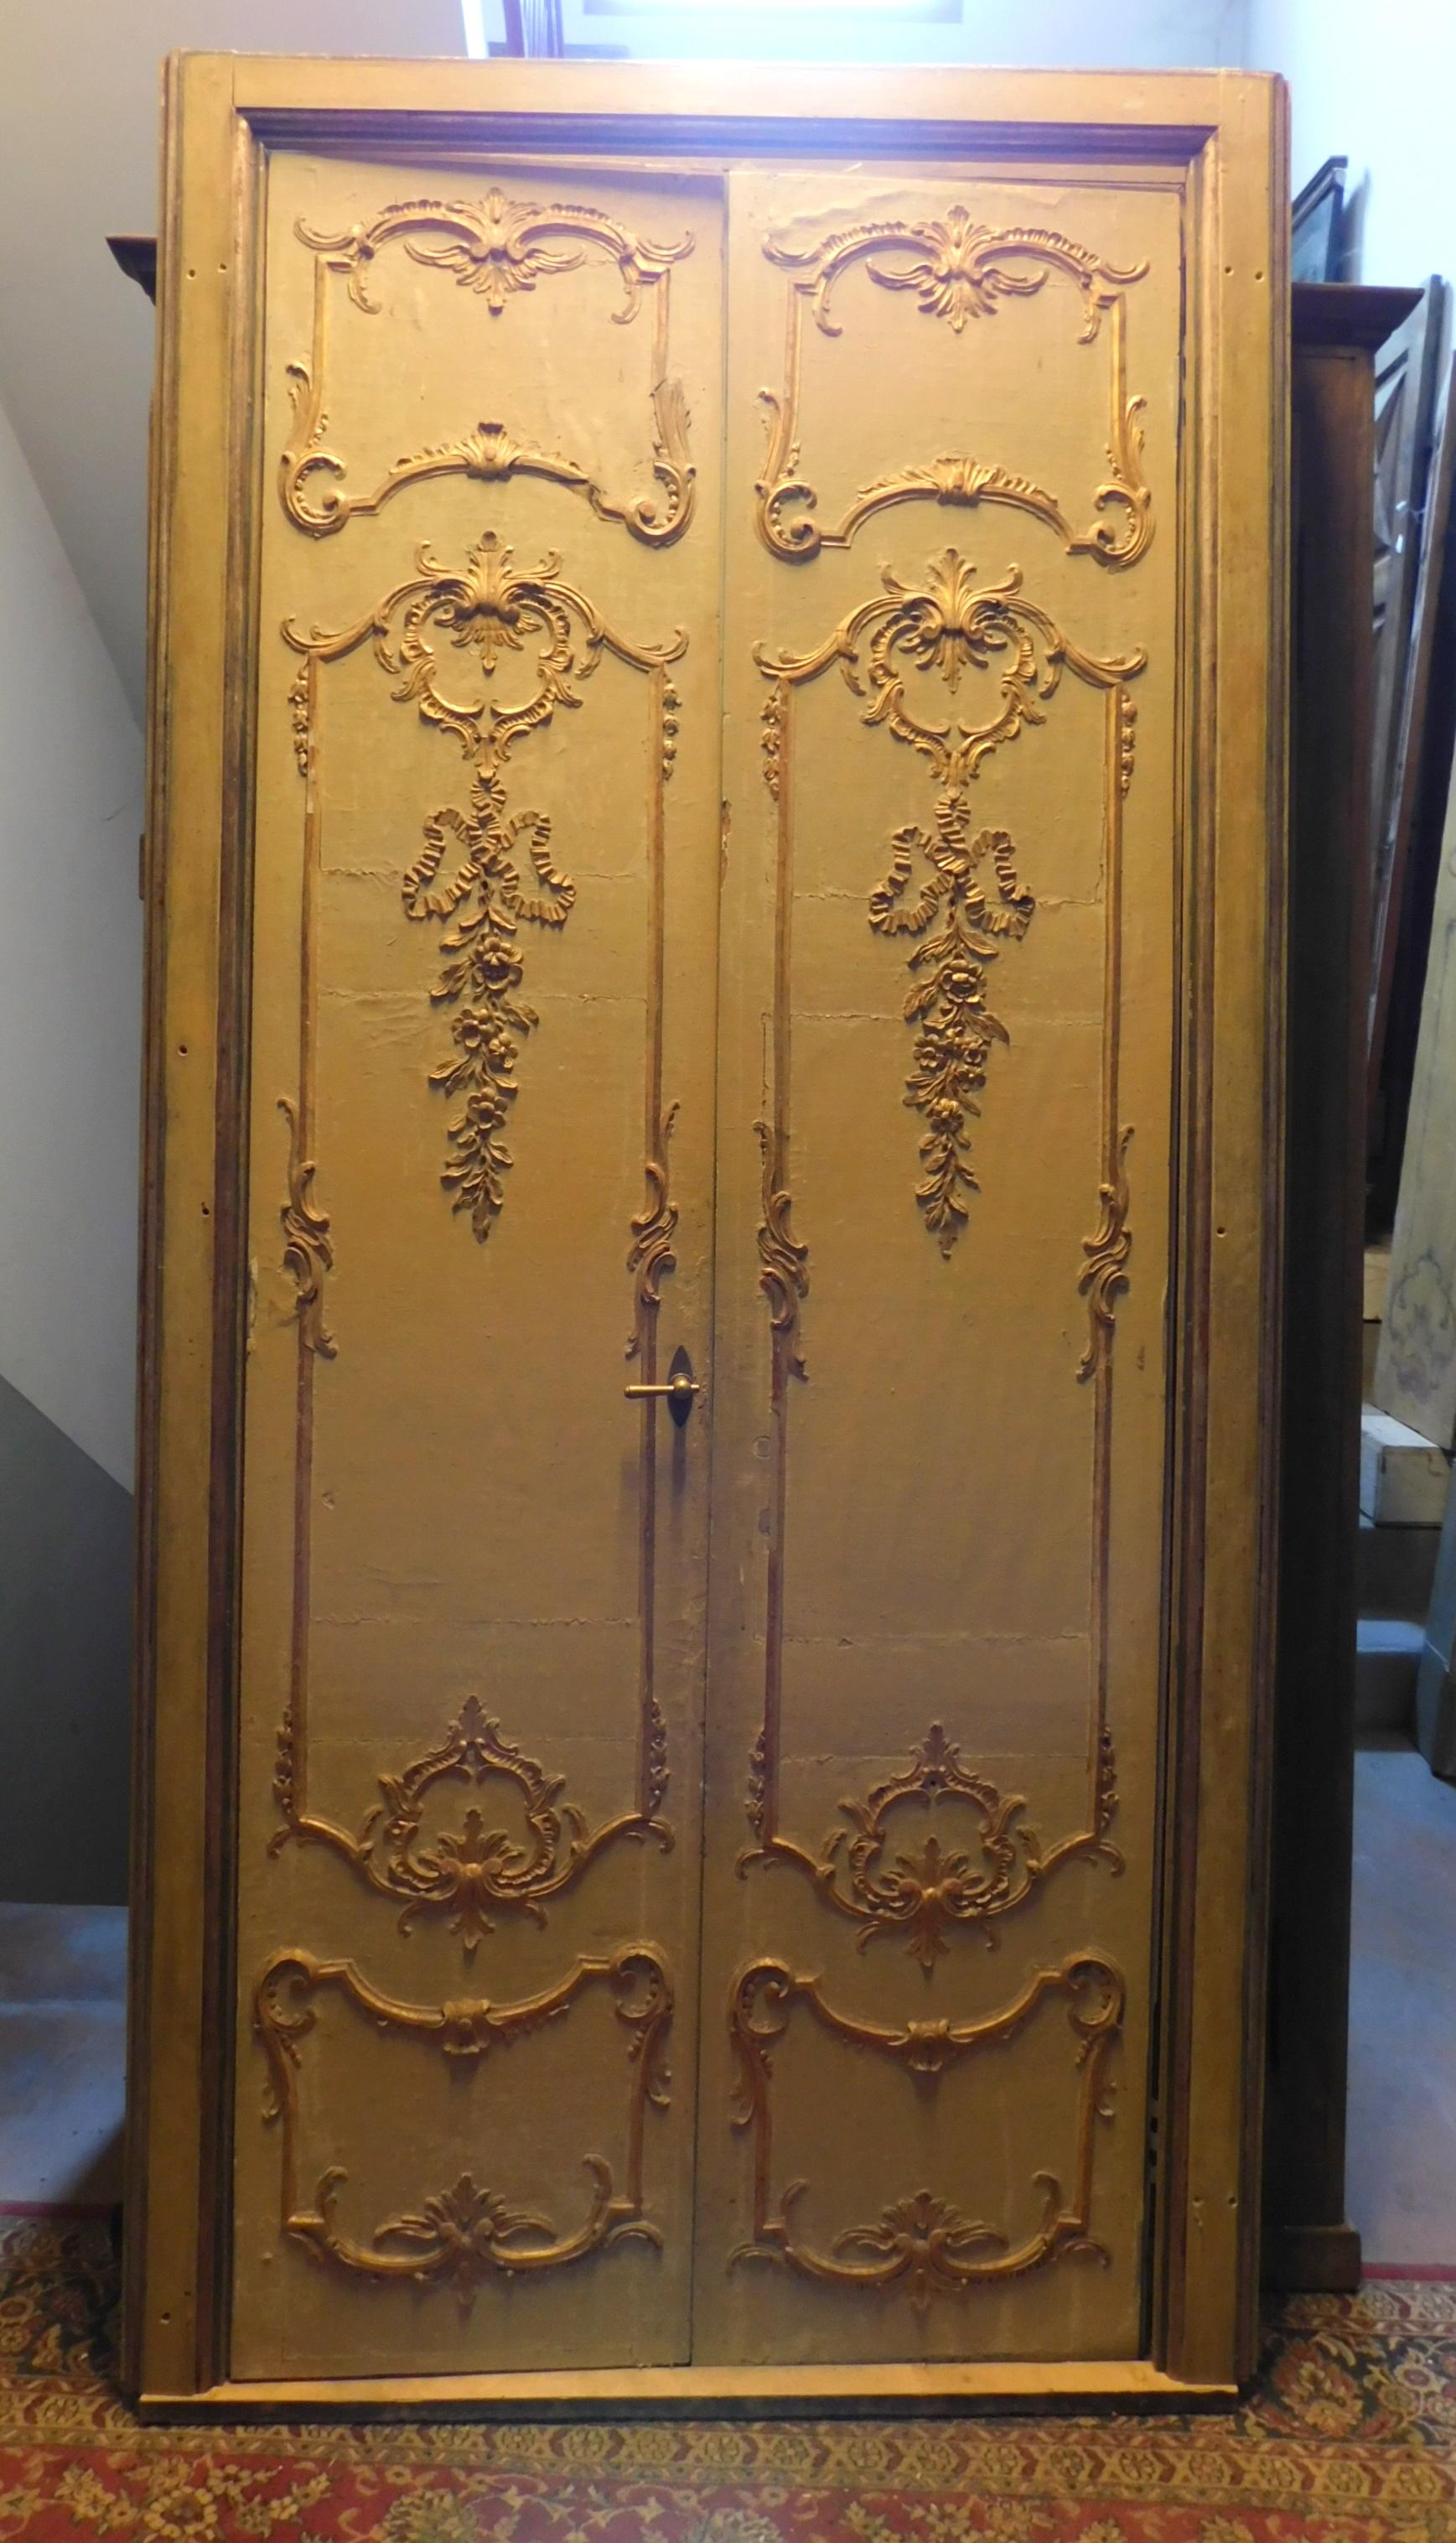 Wood Antique Lacquered and Gilded Double Door with Frame, 19th Century, Milan 'Italy'